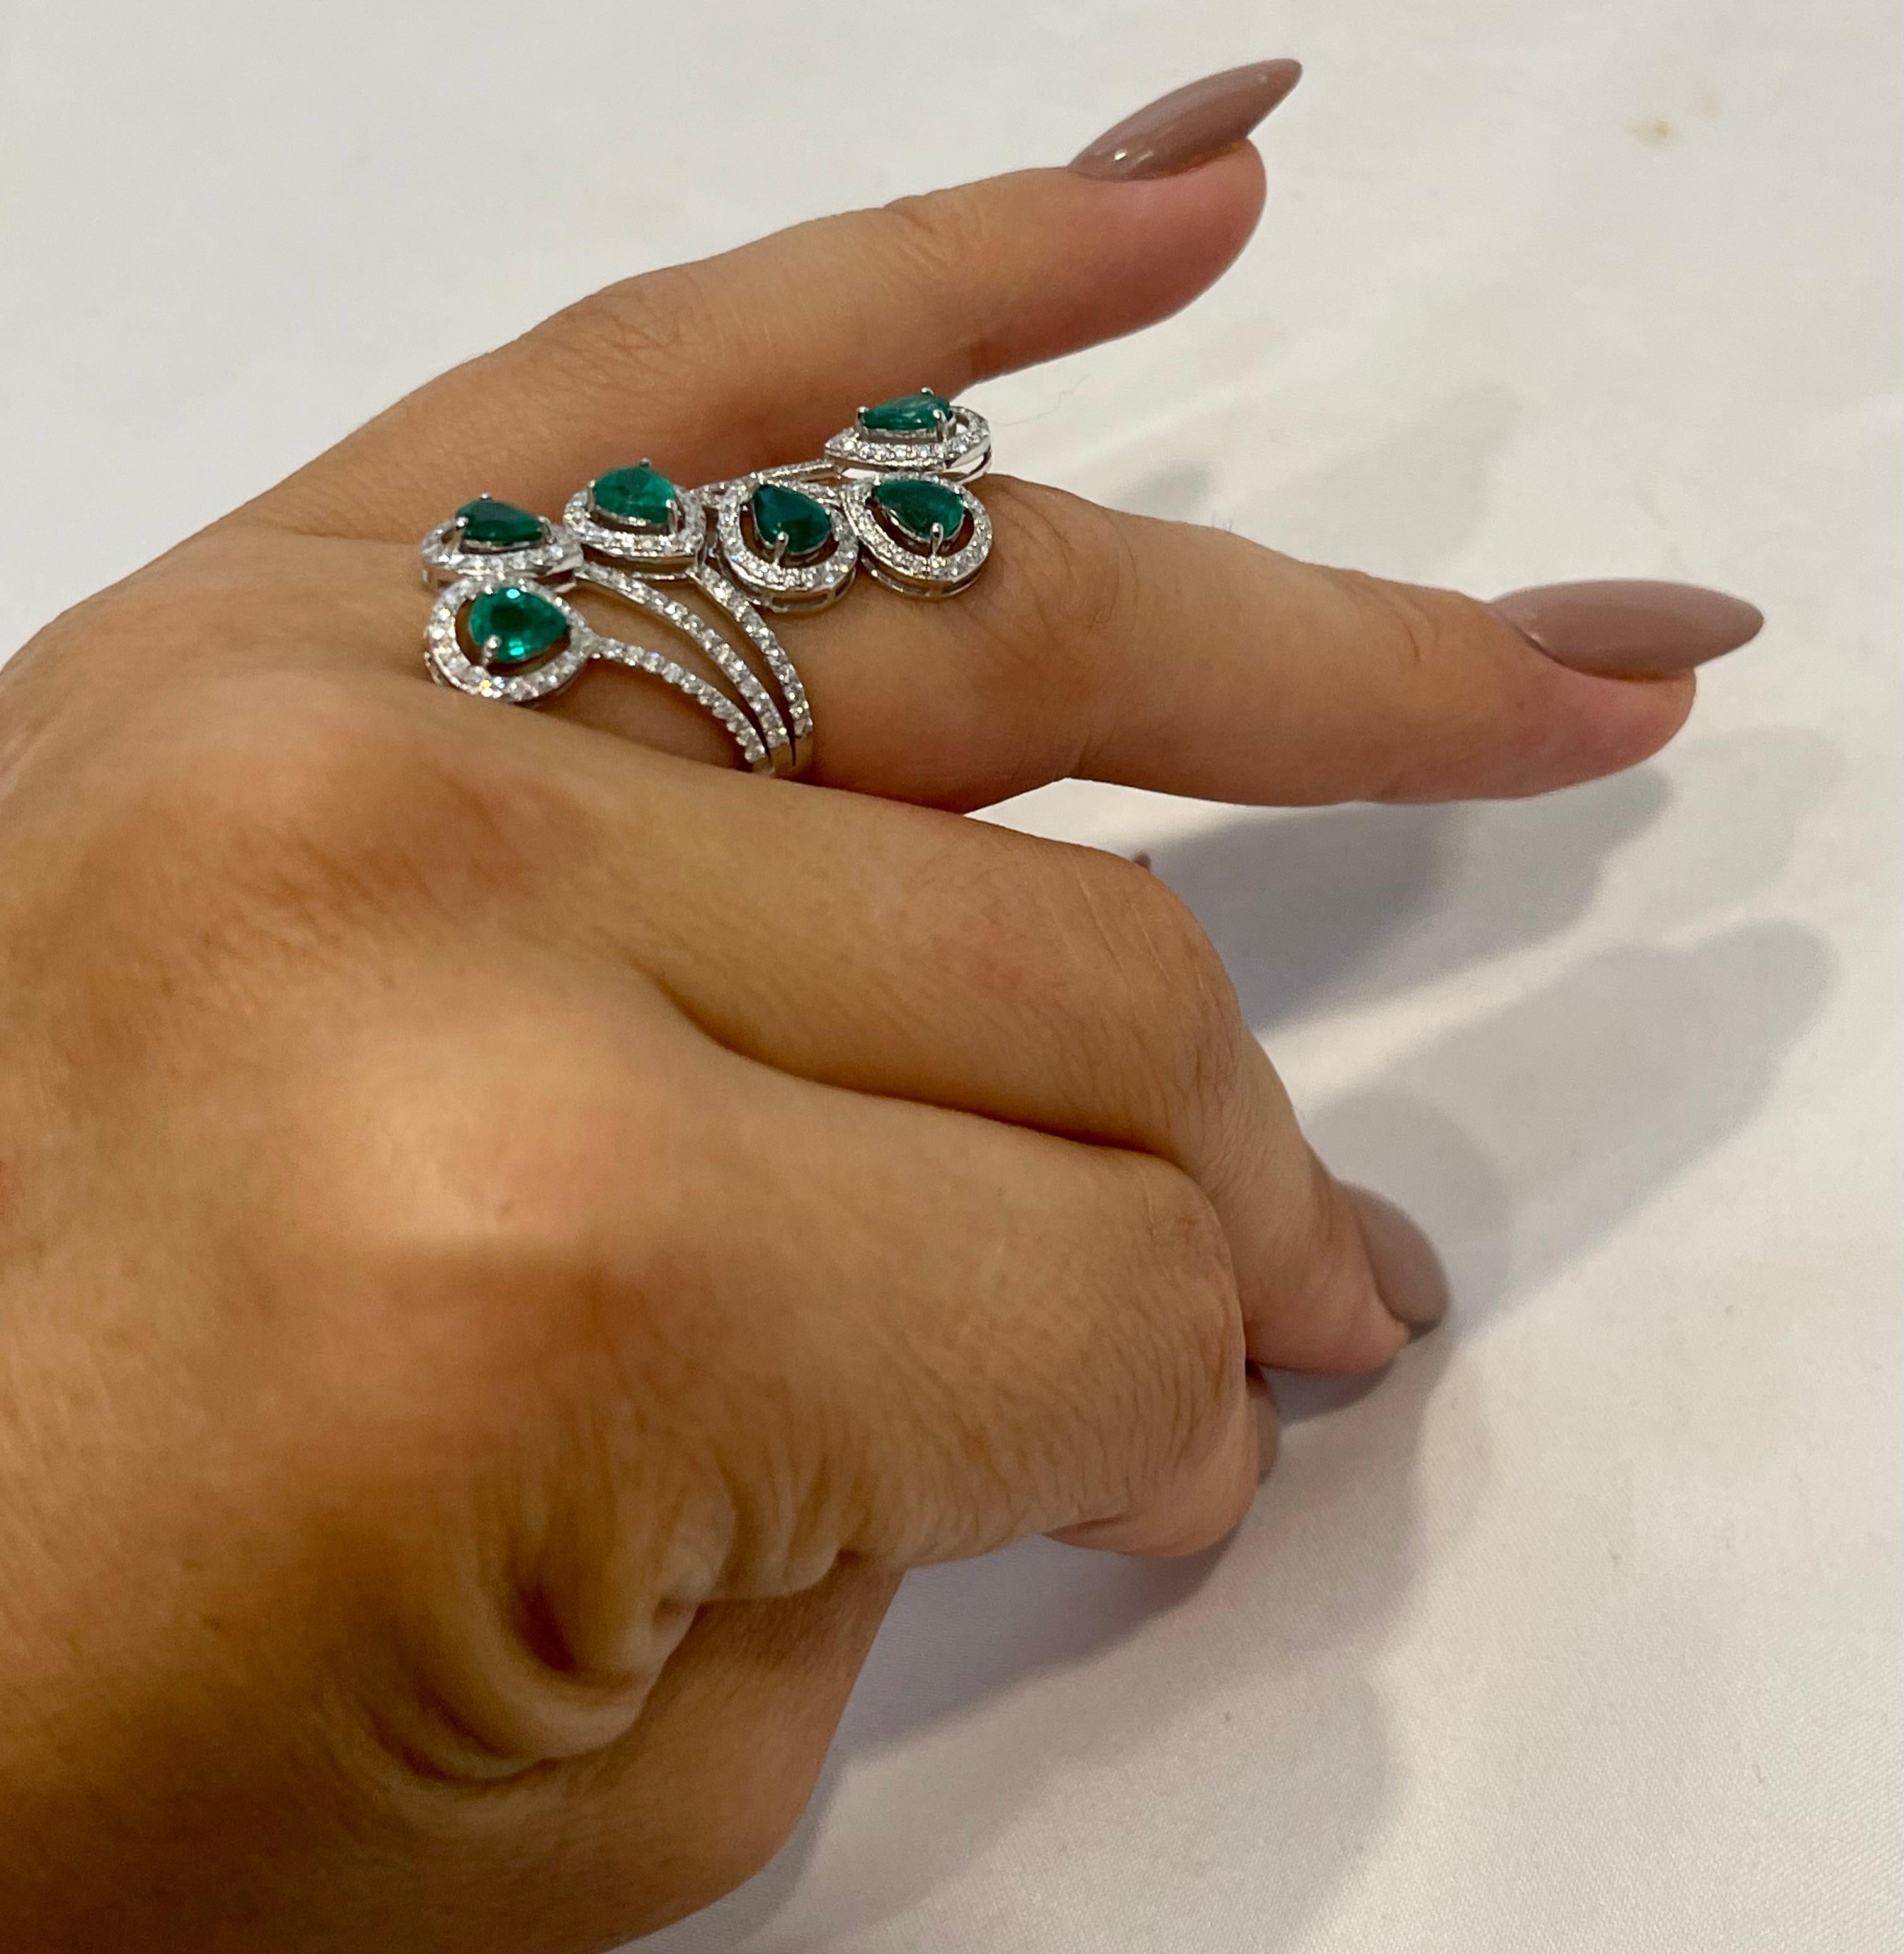 3 Ct Natural  Zambian Emeralds and 1.2 Ct Diamond Ring in 14 karat White Gold In New Condition For Sale In New York, NY